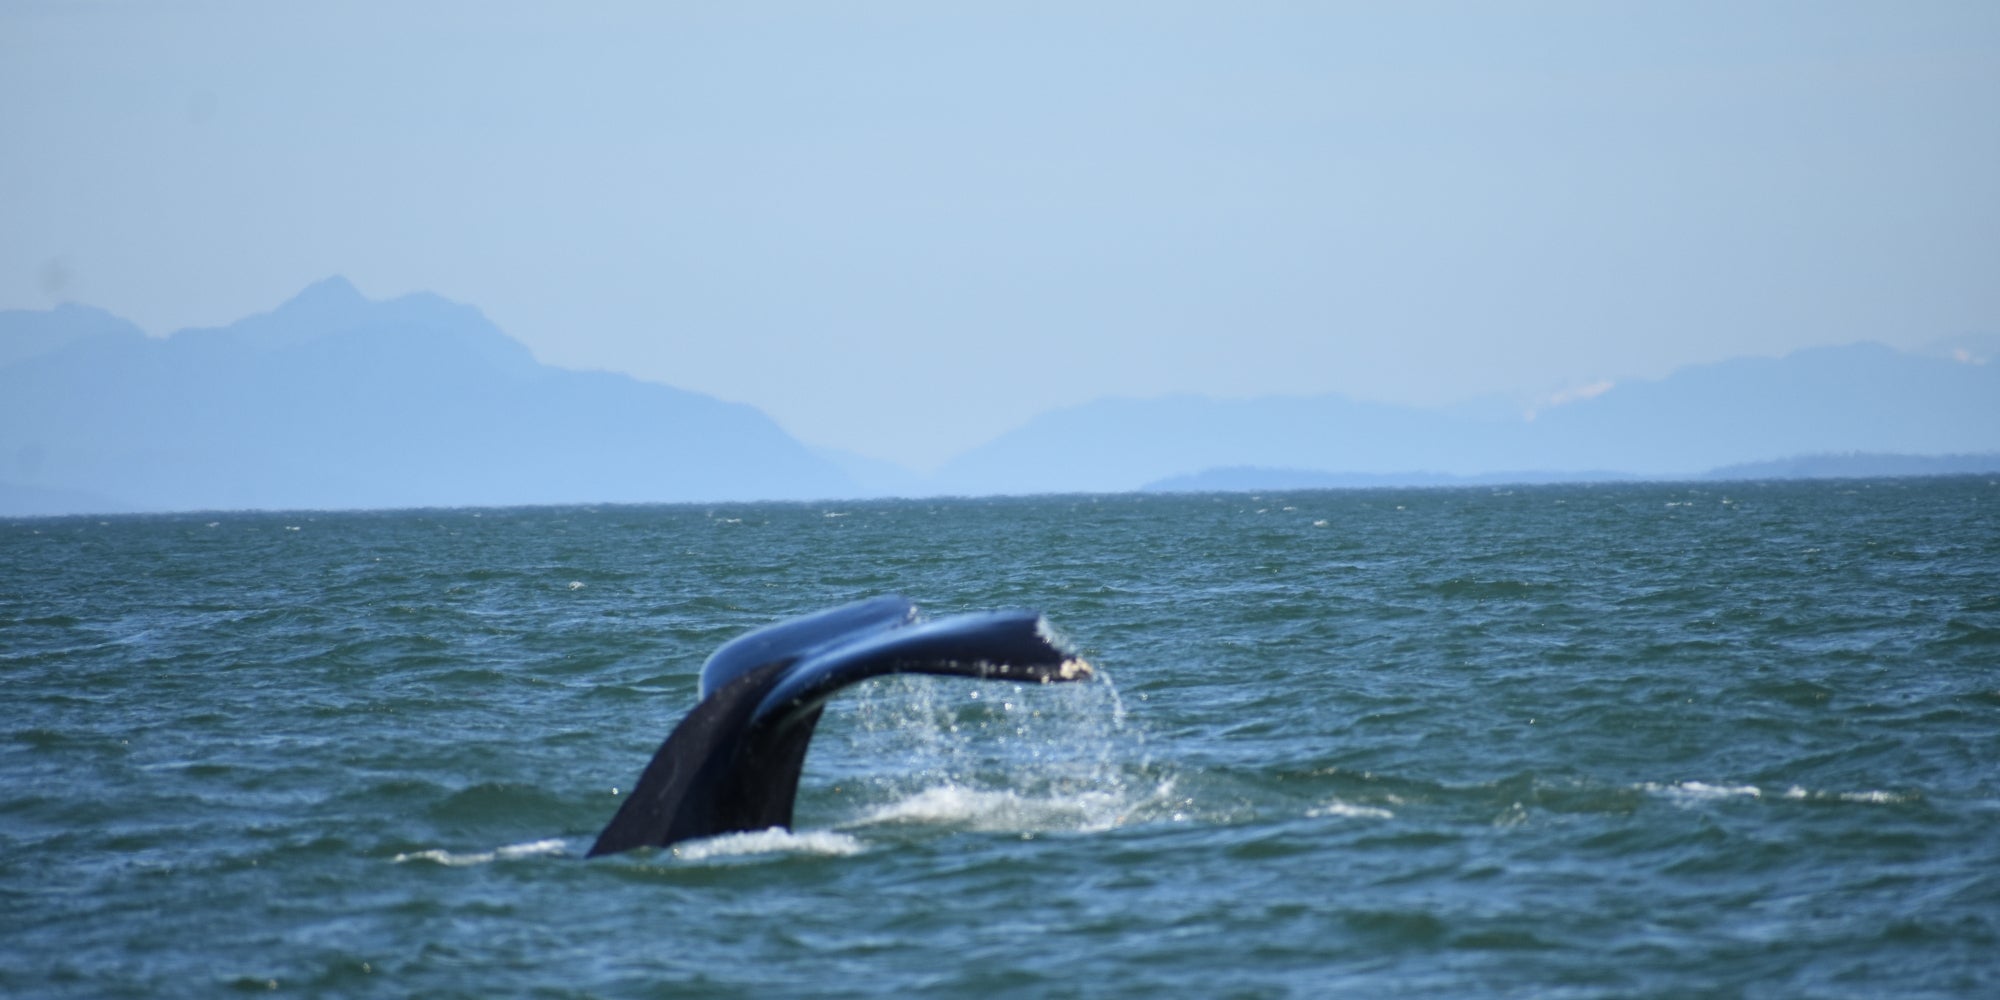 image of a whale